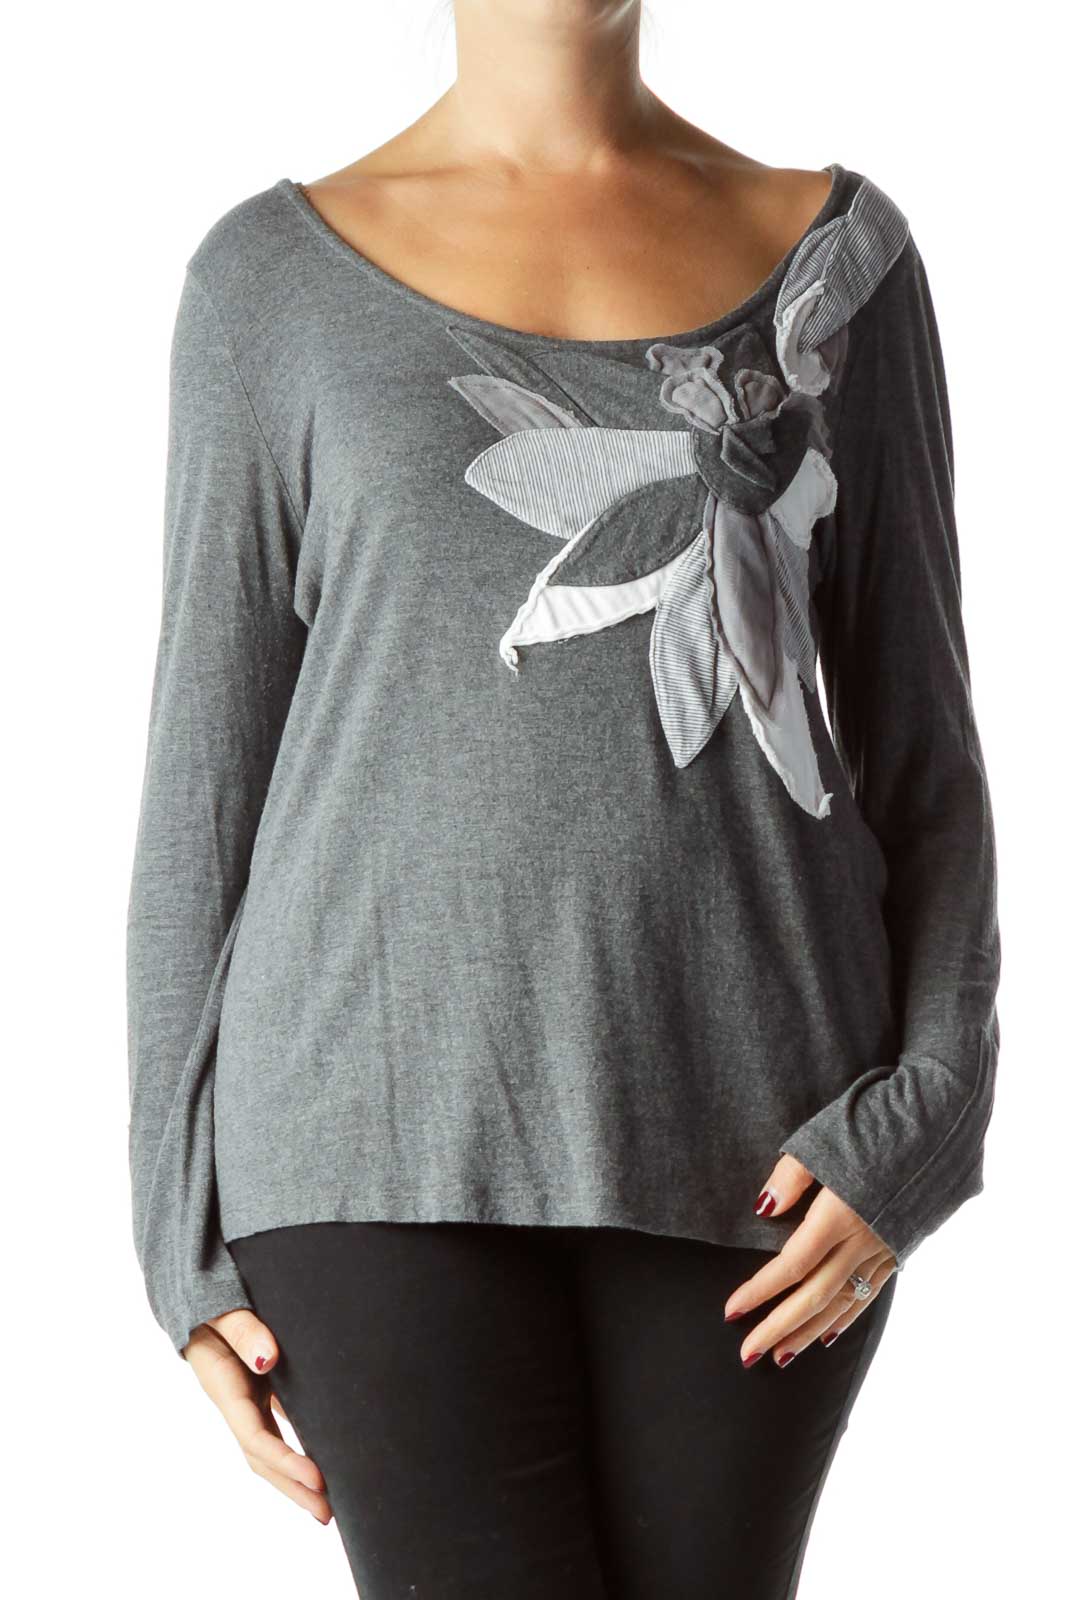 Gray Long Sleeve Top with Flower Design Front